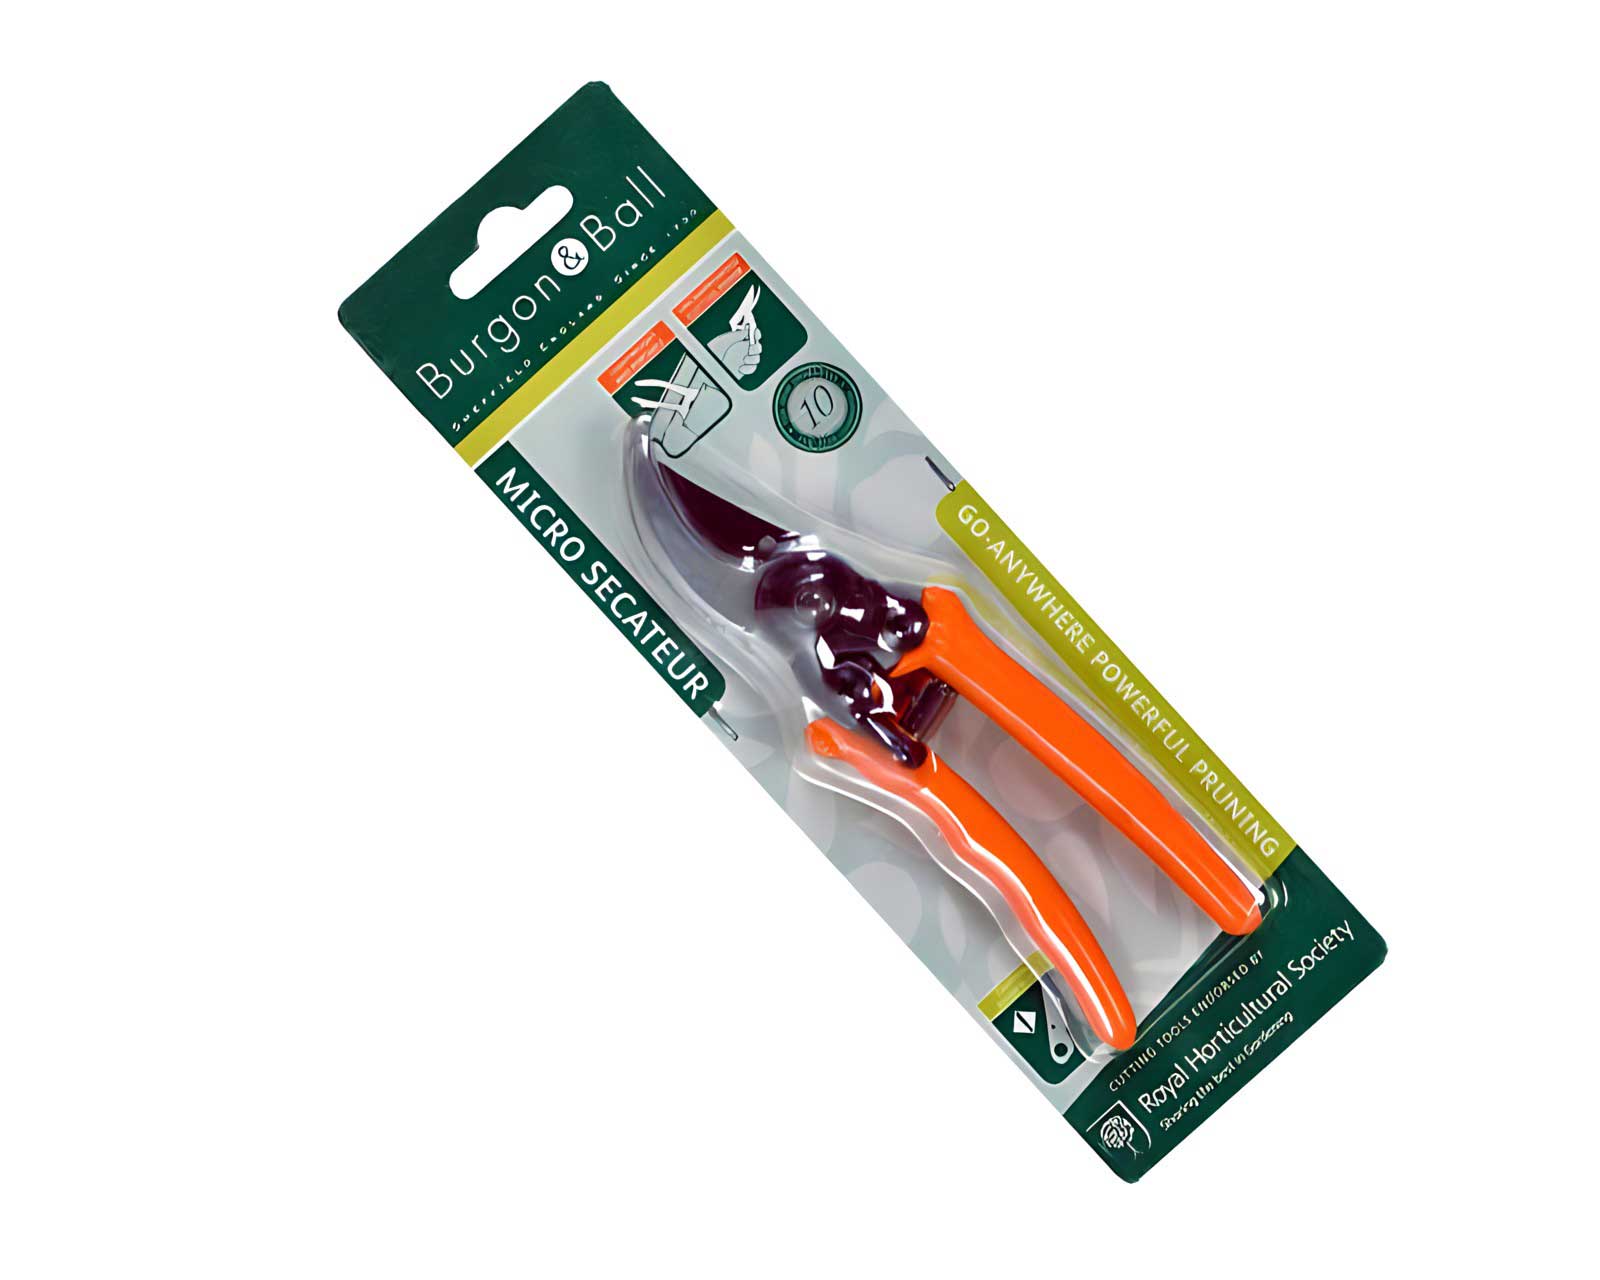 New RHS endorsed Micro Secateurs for small hands